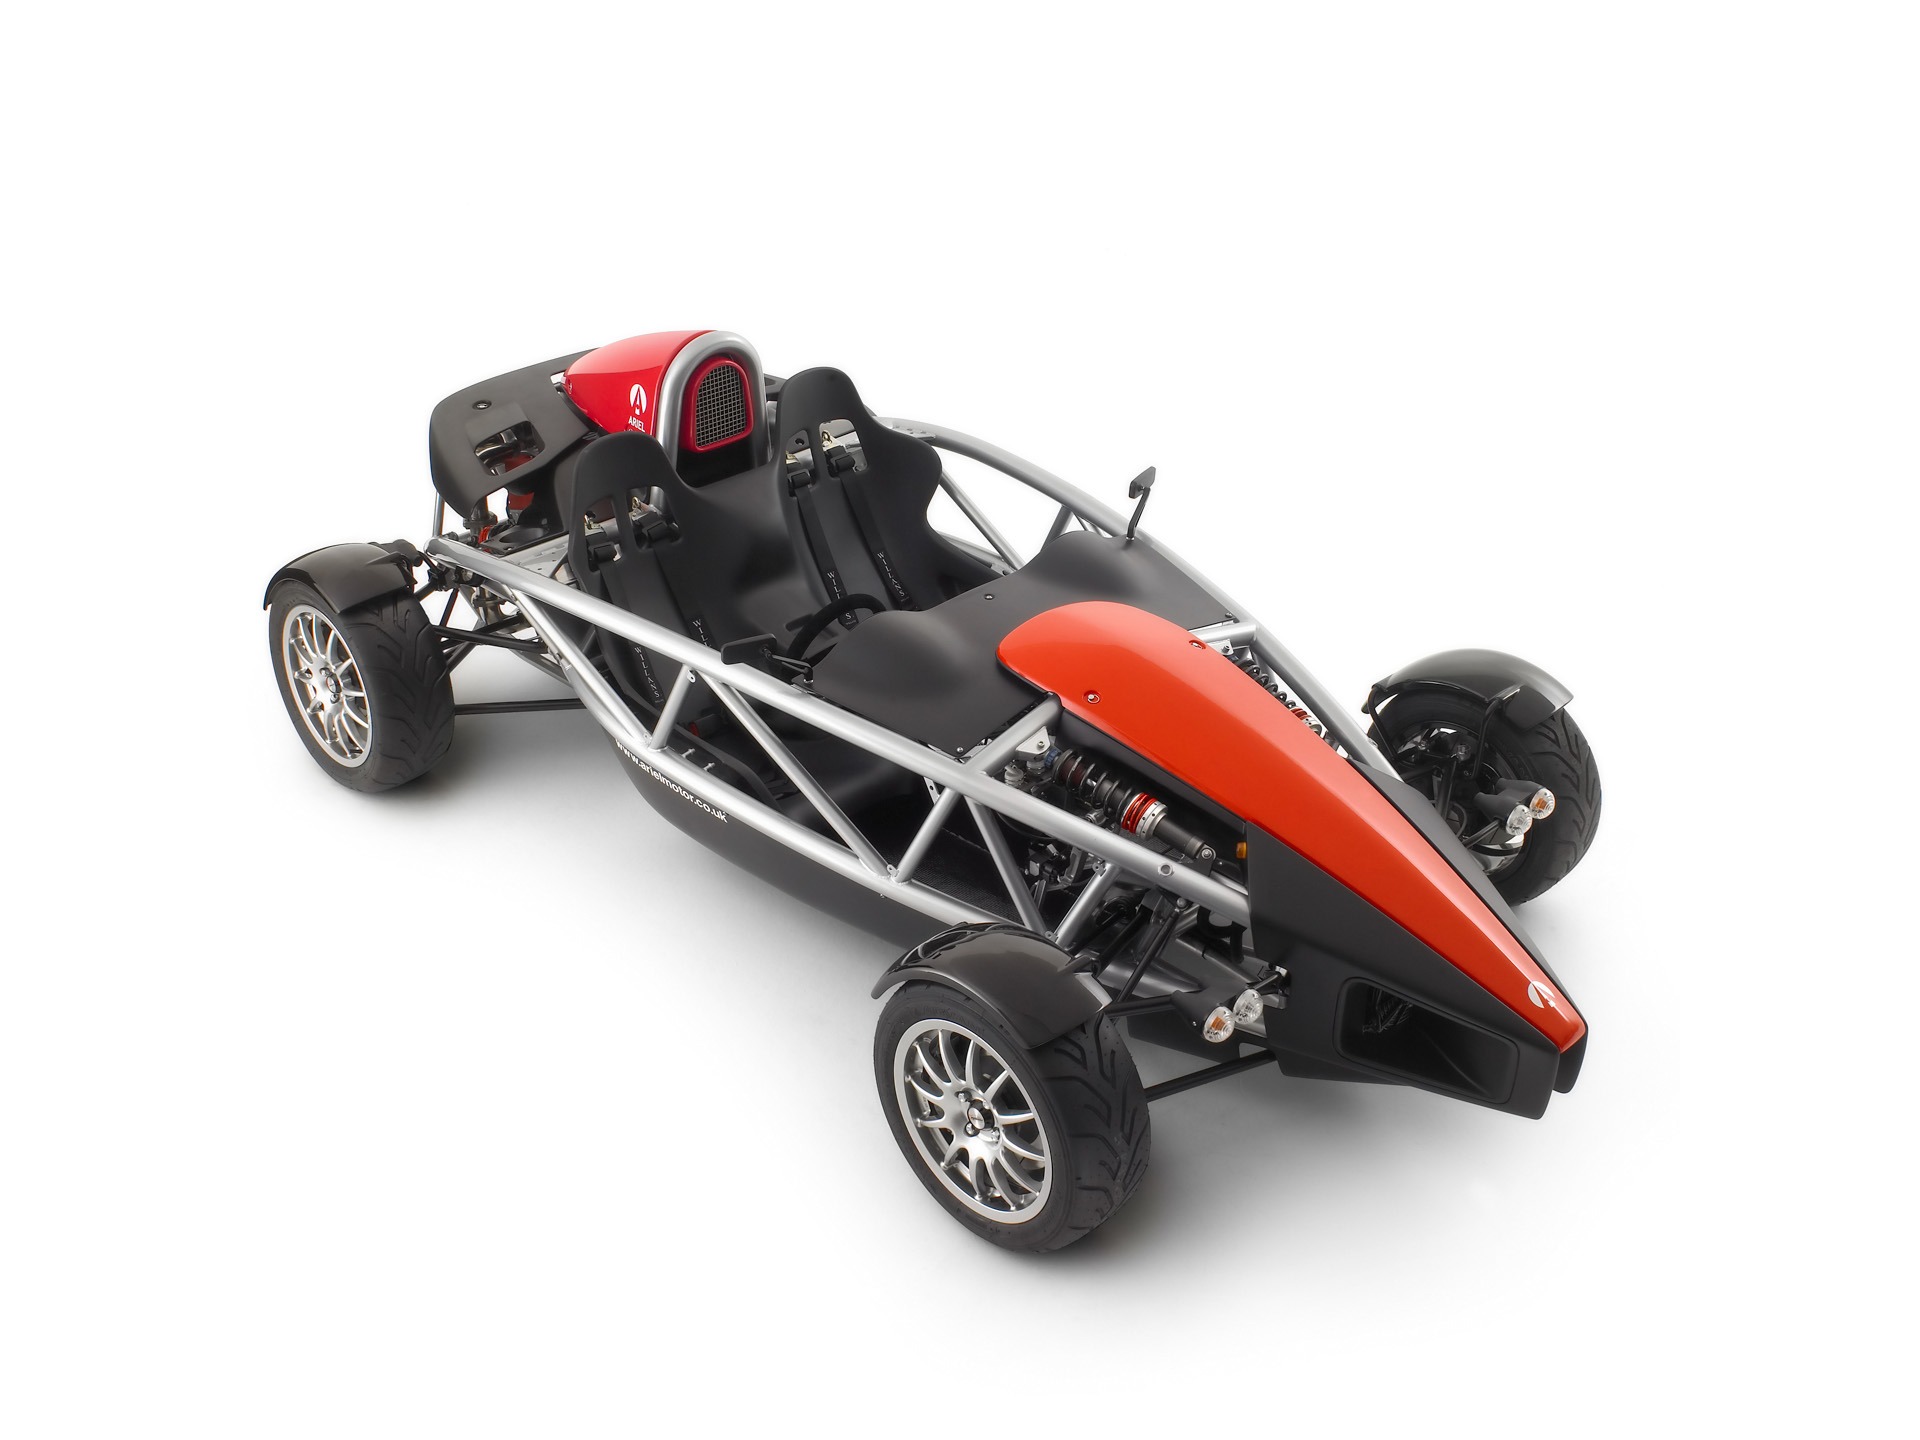 Ariel Atom Wallpaper Other Cars In Jpg Format For